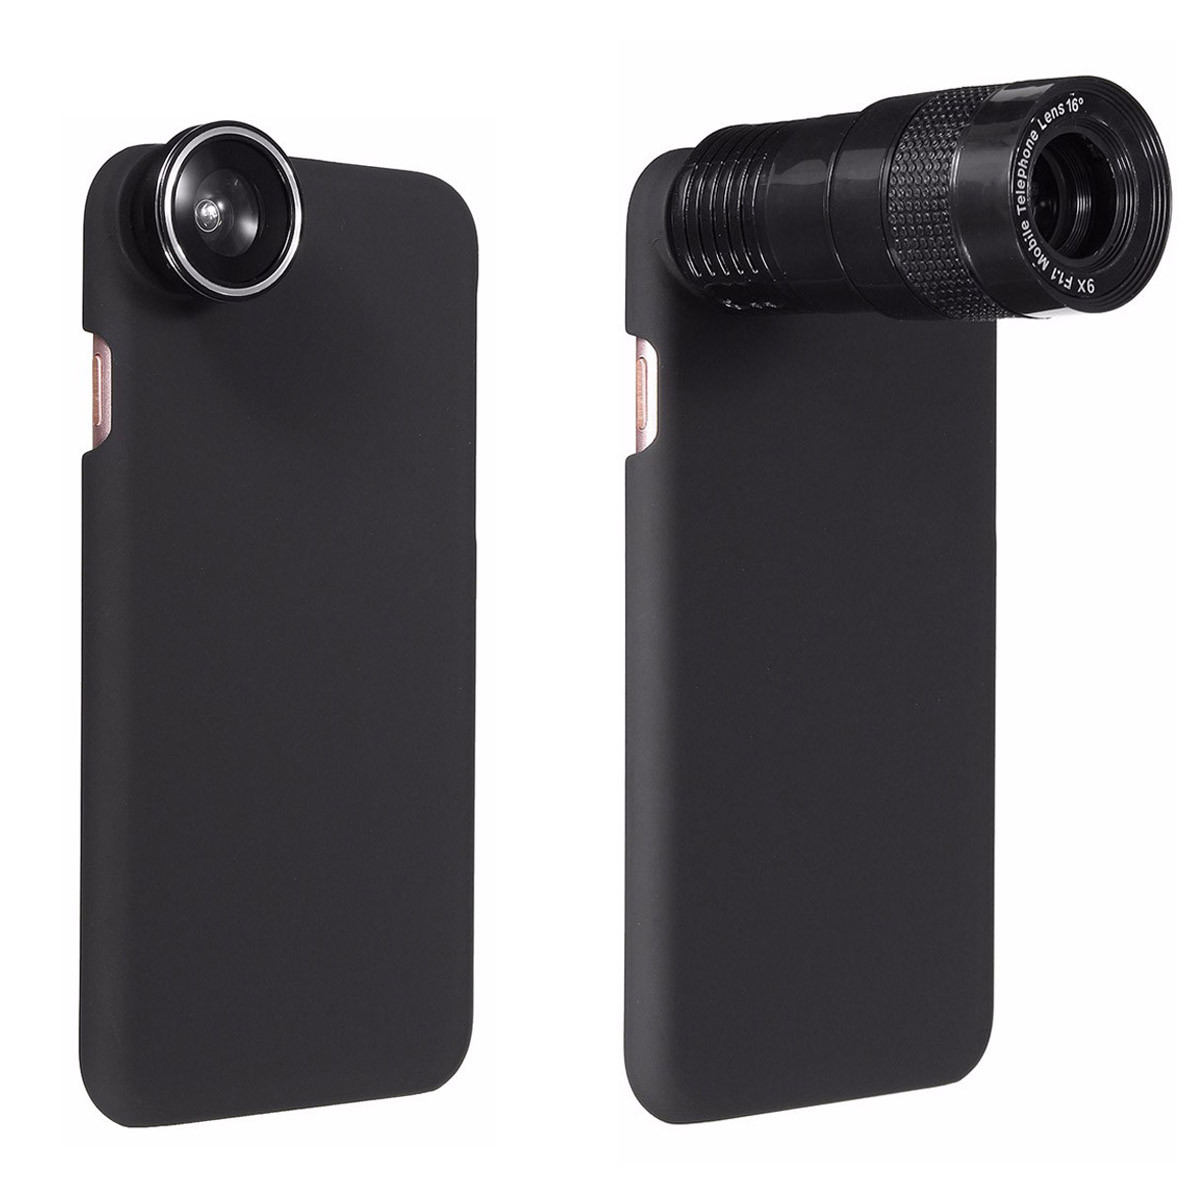 5-In-1-9X-Telephoto-063X-Wide-Angle-Macro-Fisheye-Lens--Case-For-Apple-iPhone-7-Plus-1114411